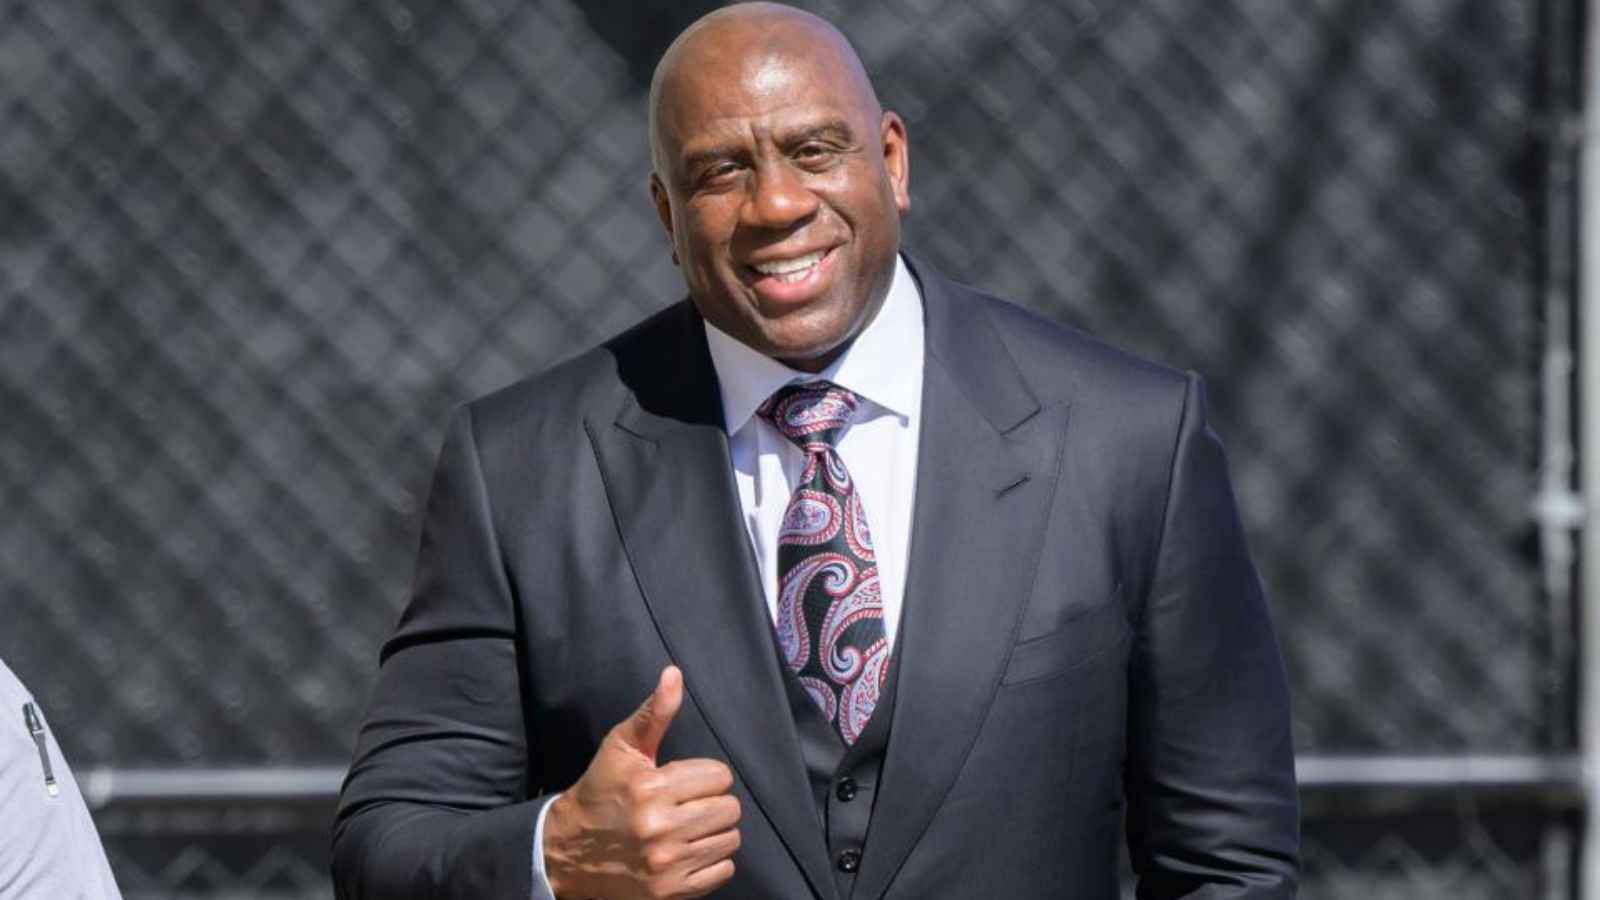 Magic Johnson Becomes Fourth Athlete To Earn One Billion Dollars